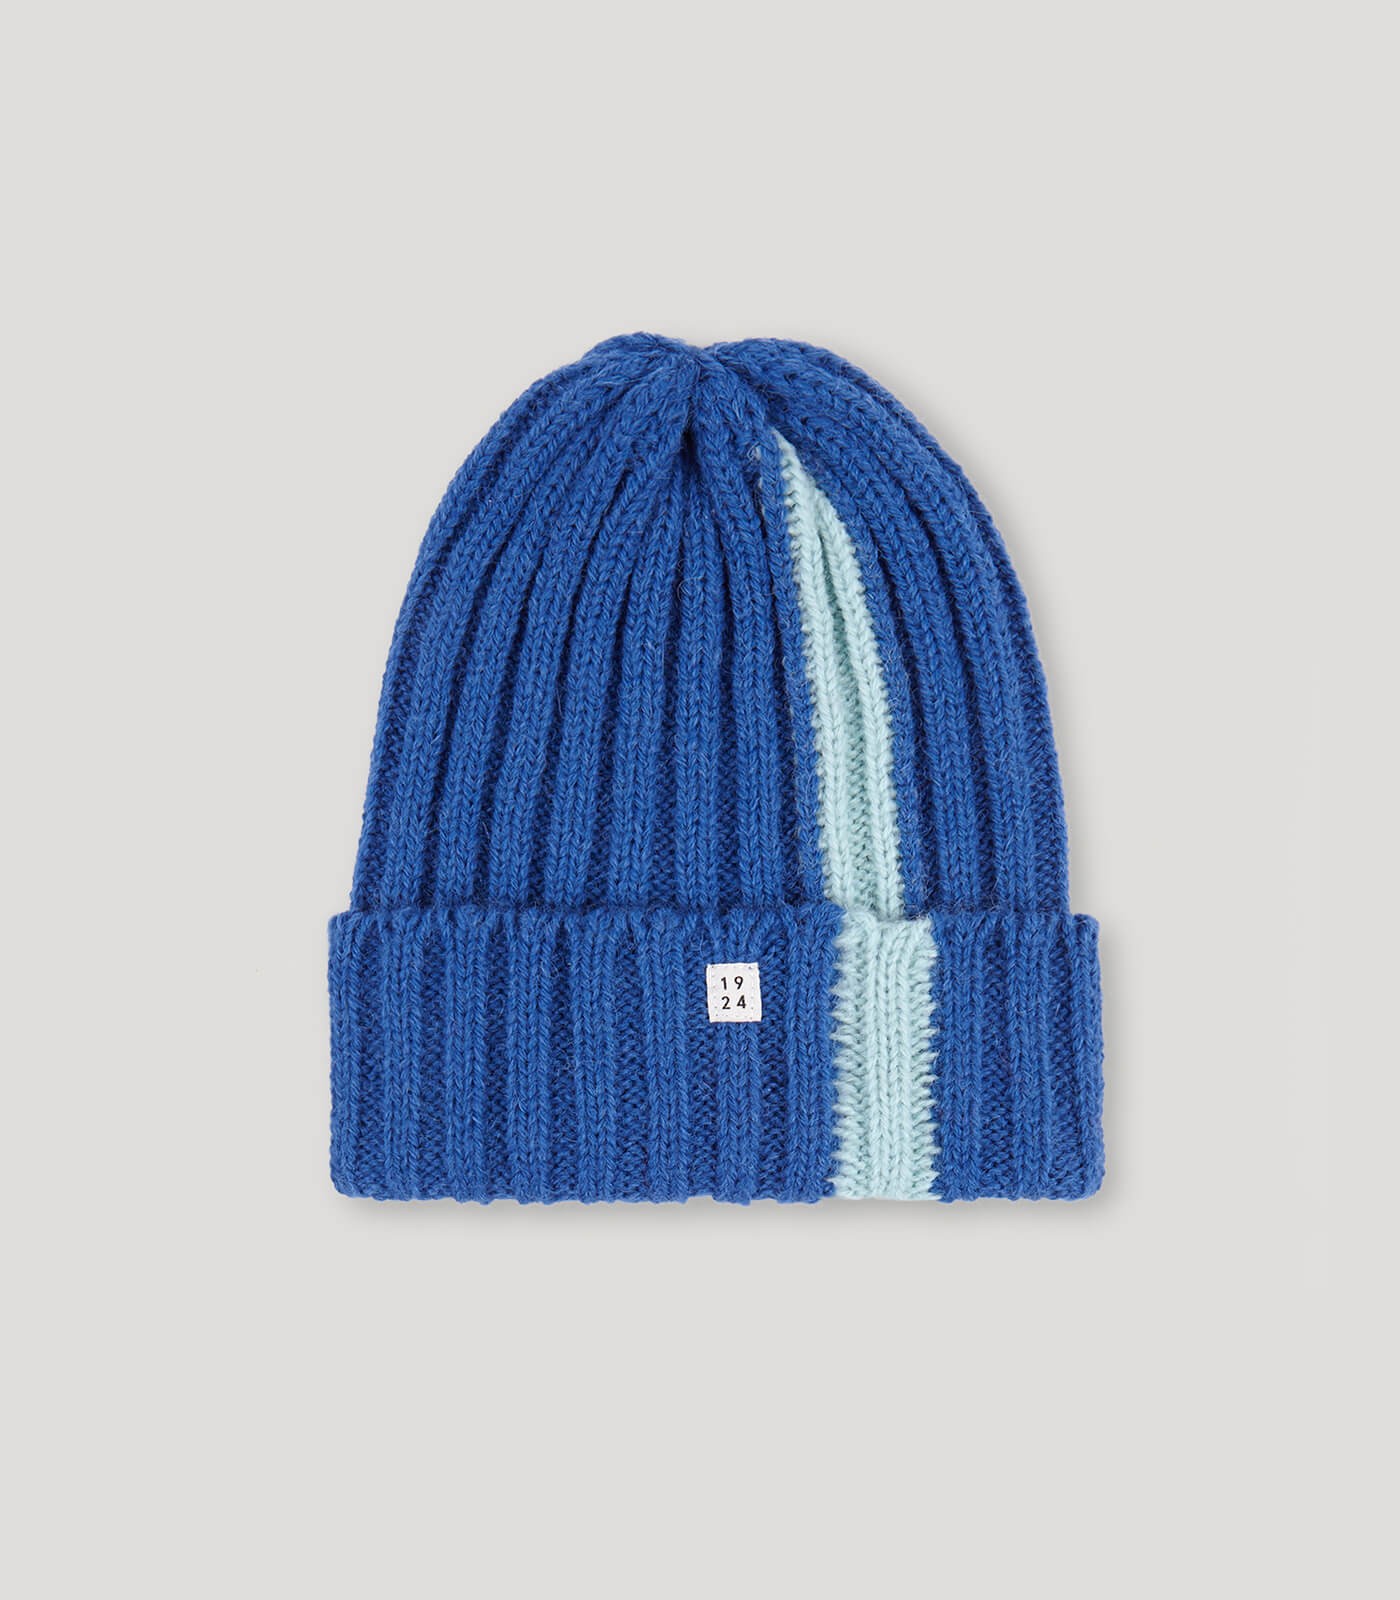 Blue- Mint Stripes Wool Knitted Hat